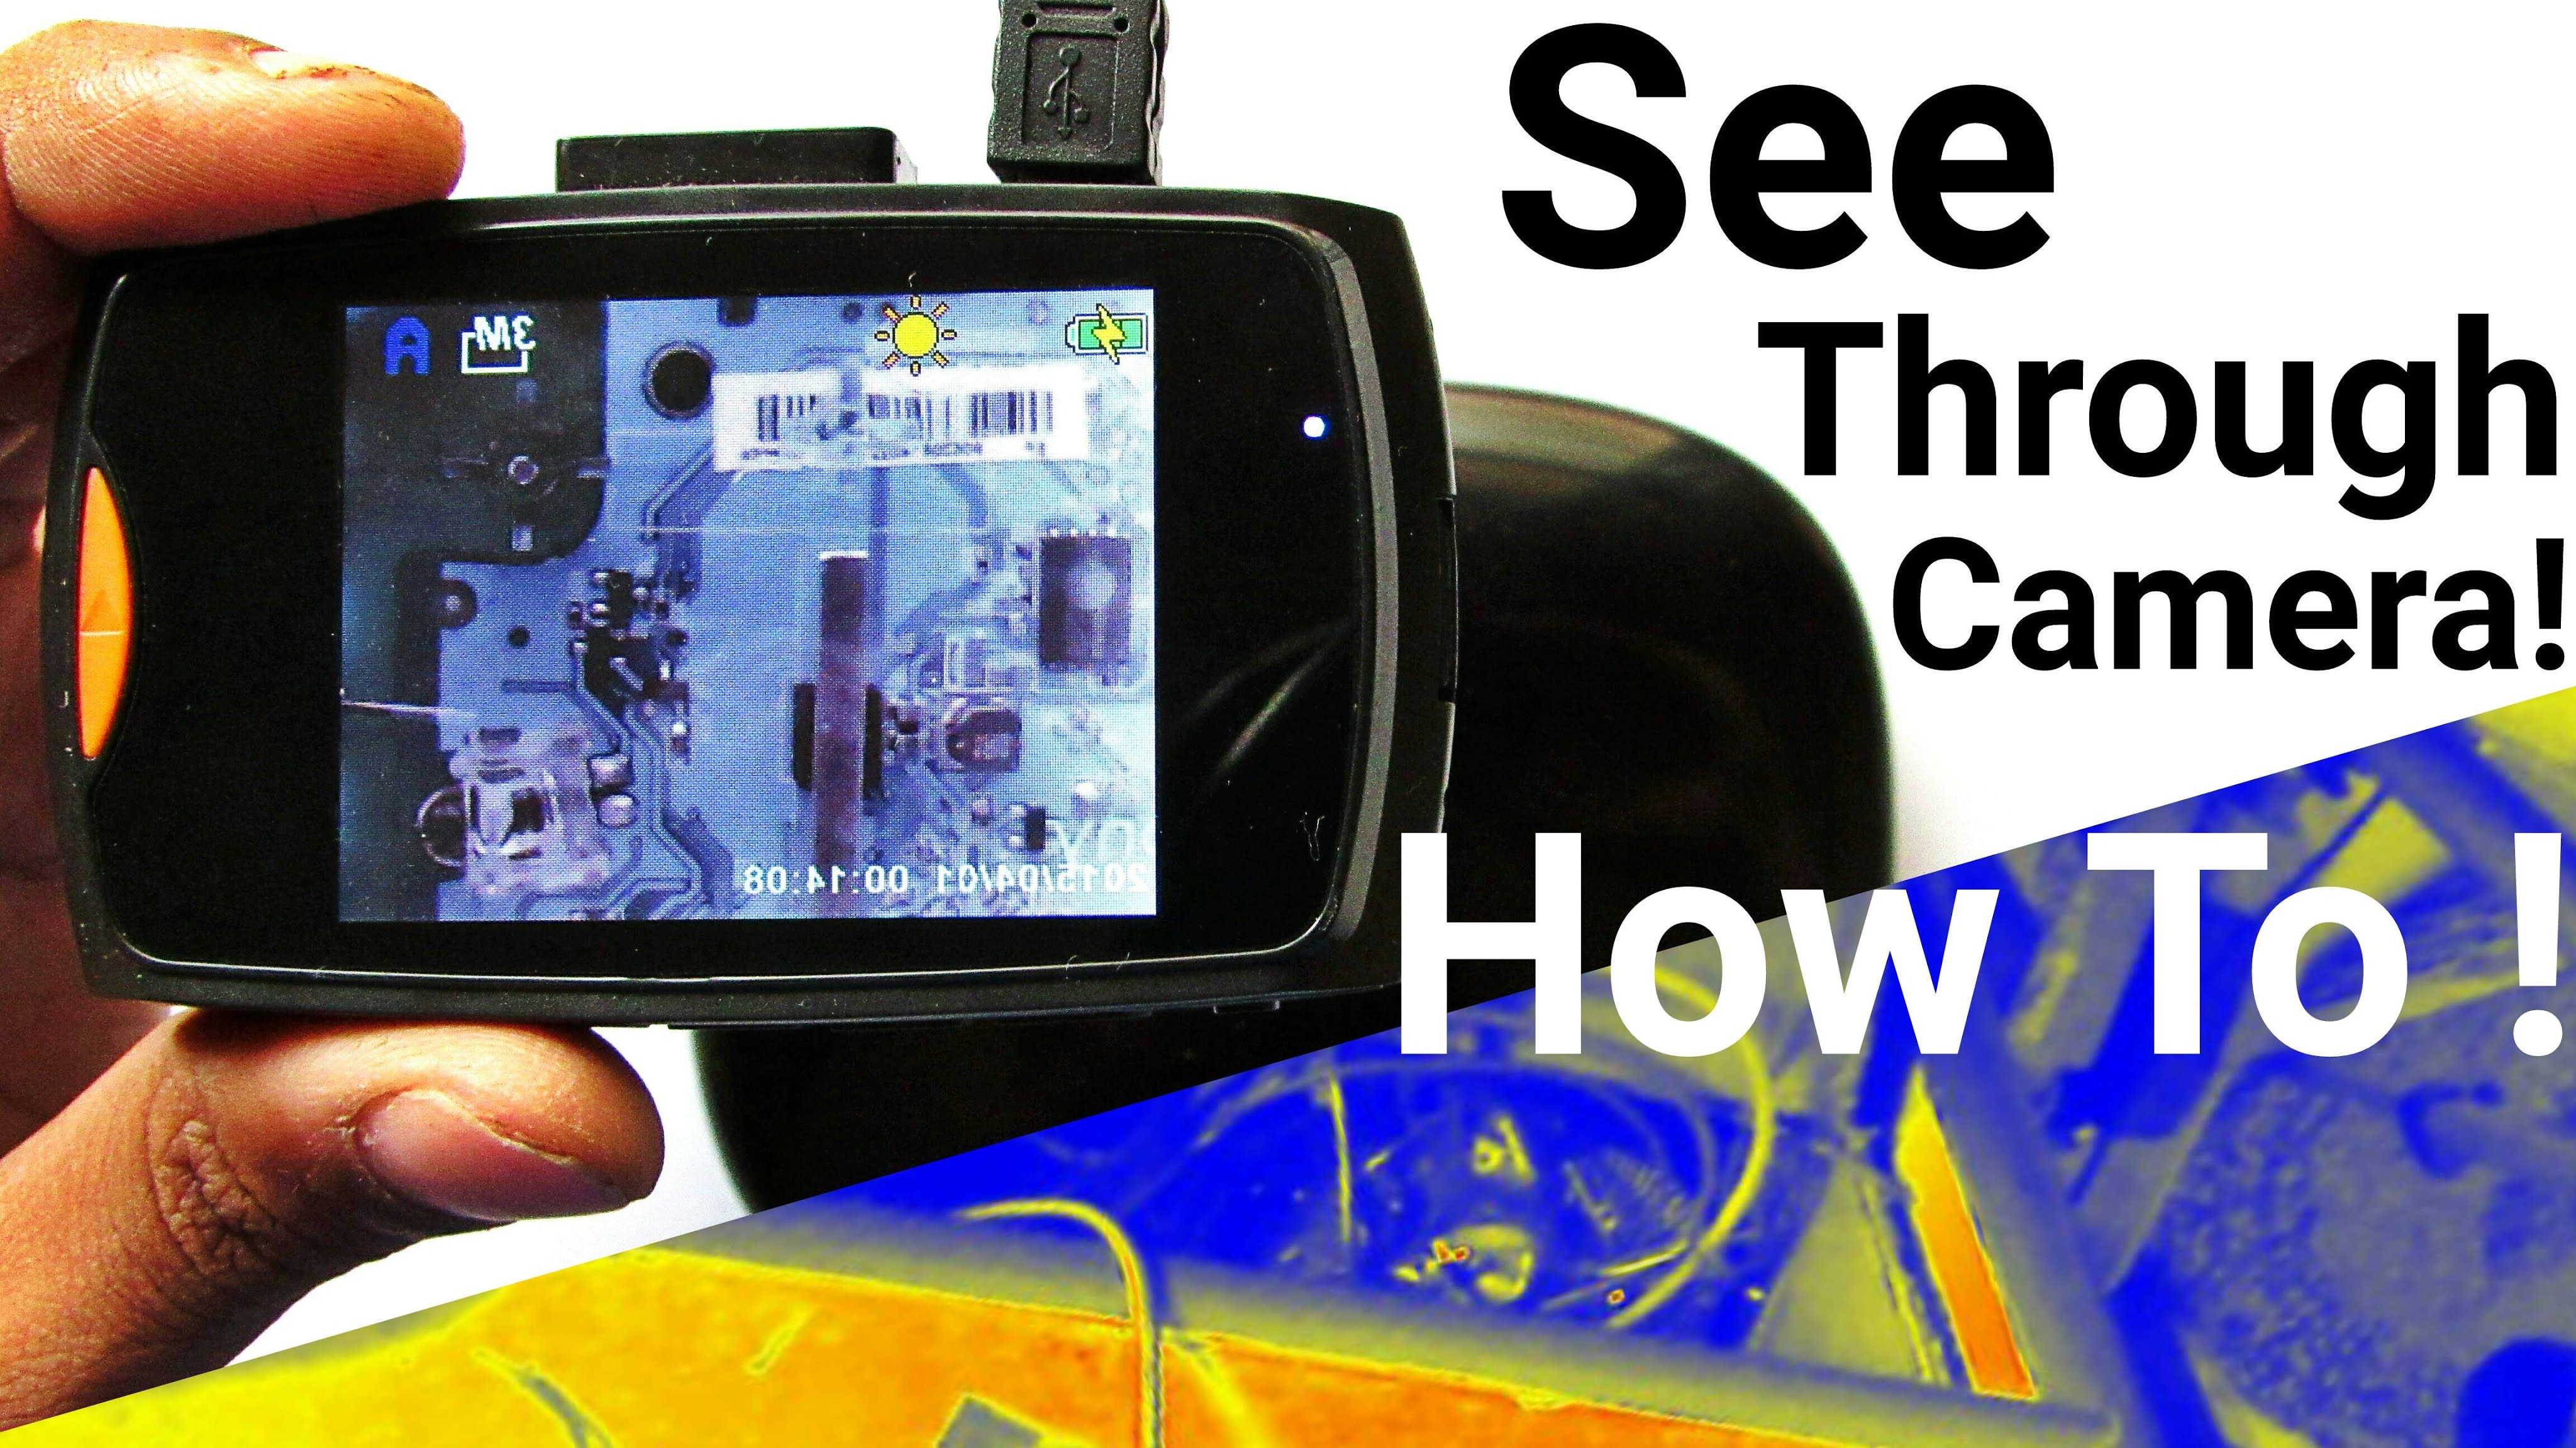 DIY How To Make See Through Infrared Thermal Imaging Camera For Cheap In Just 10 $ !